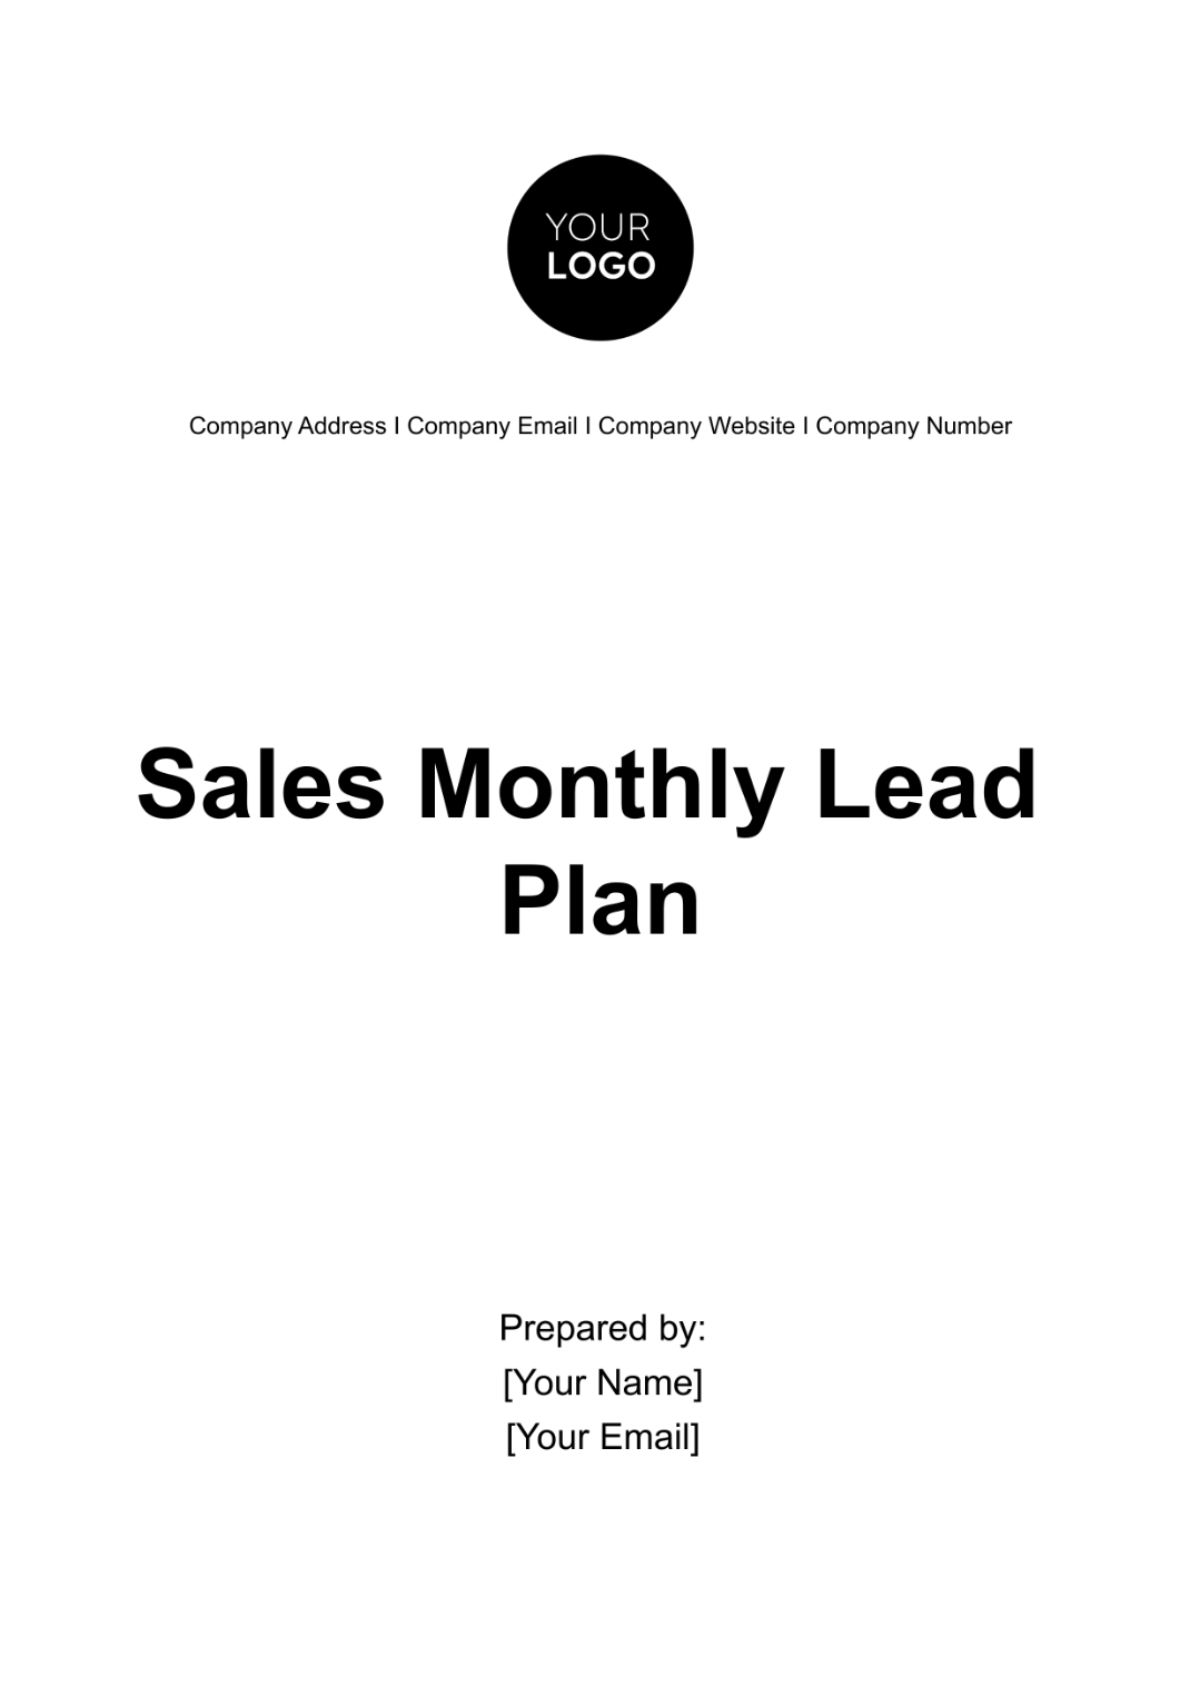 Free Sales Monthly Lead Plan Template